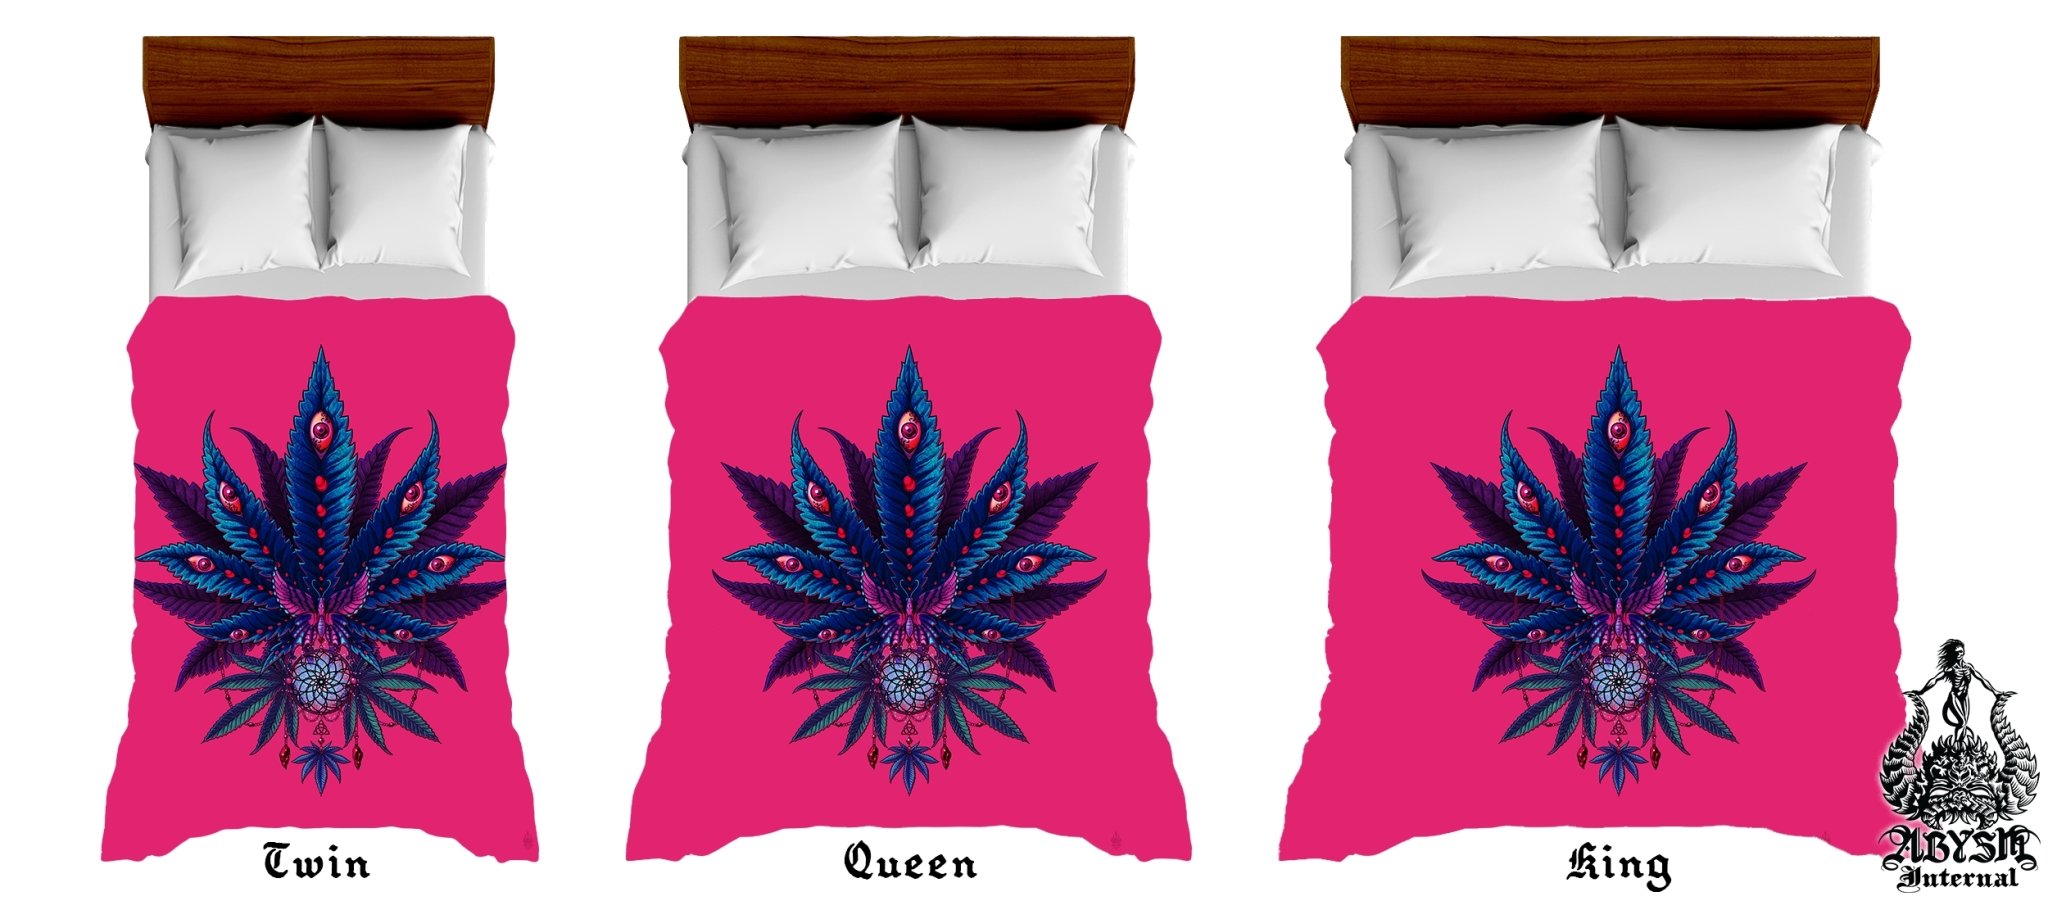 Retro Weed Bedding Set, Comforter and Duvet, Neon Bed Cover and Retrowave Bedroom Decor, King, Queen and Twin Size, Synthwave, Vaporwave 80s Gamer Room Art - Cannabis 420, I - Abysm Internal